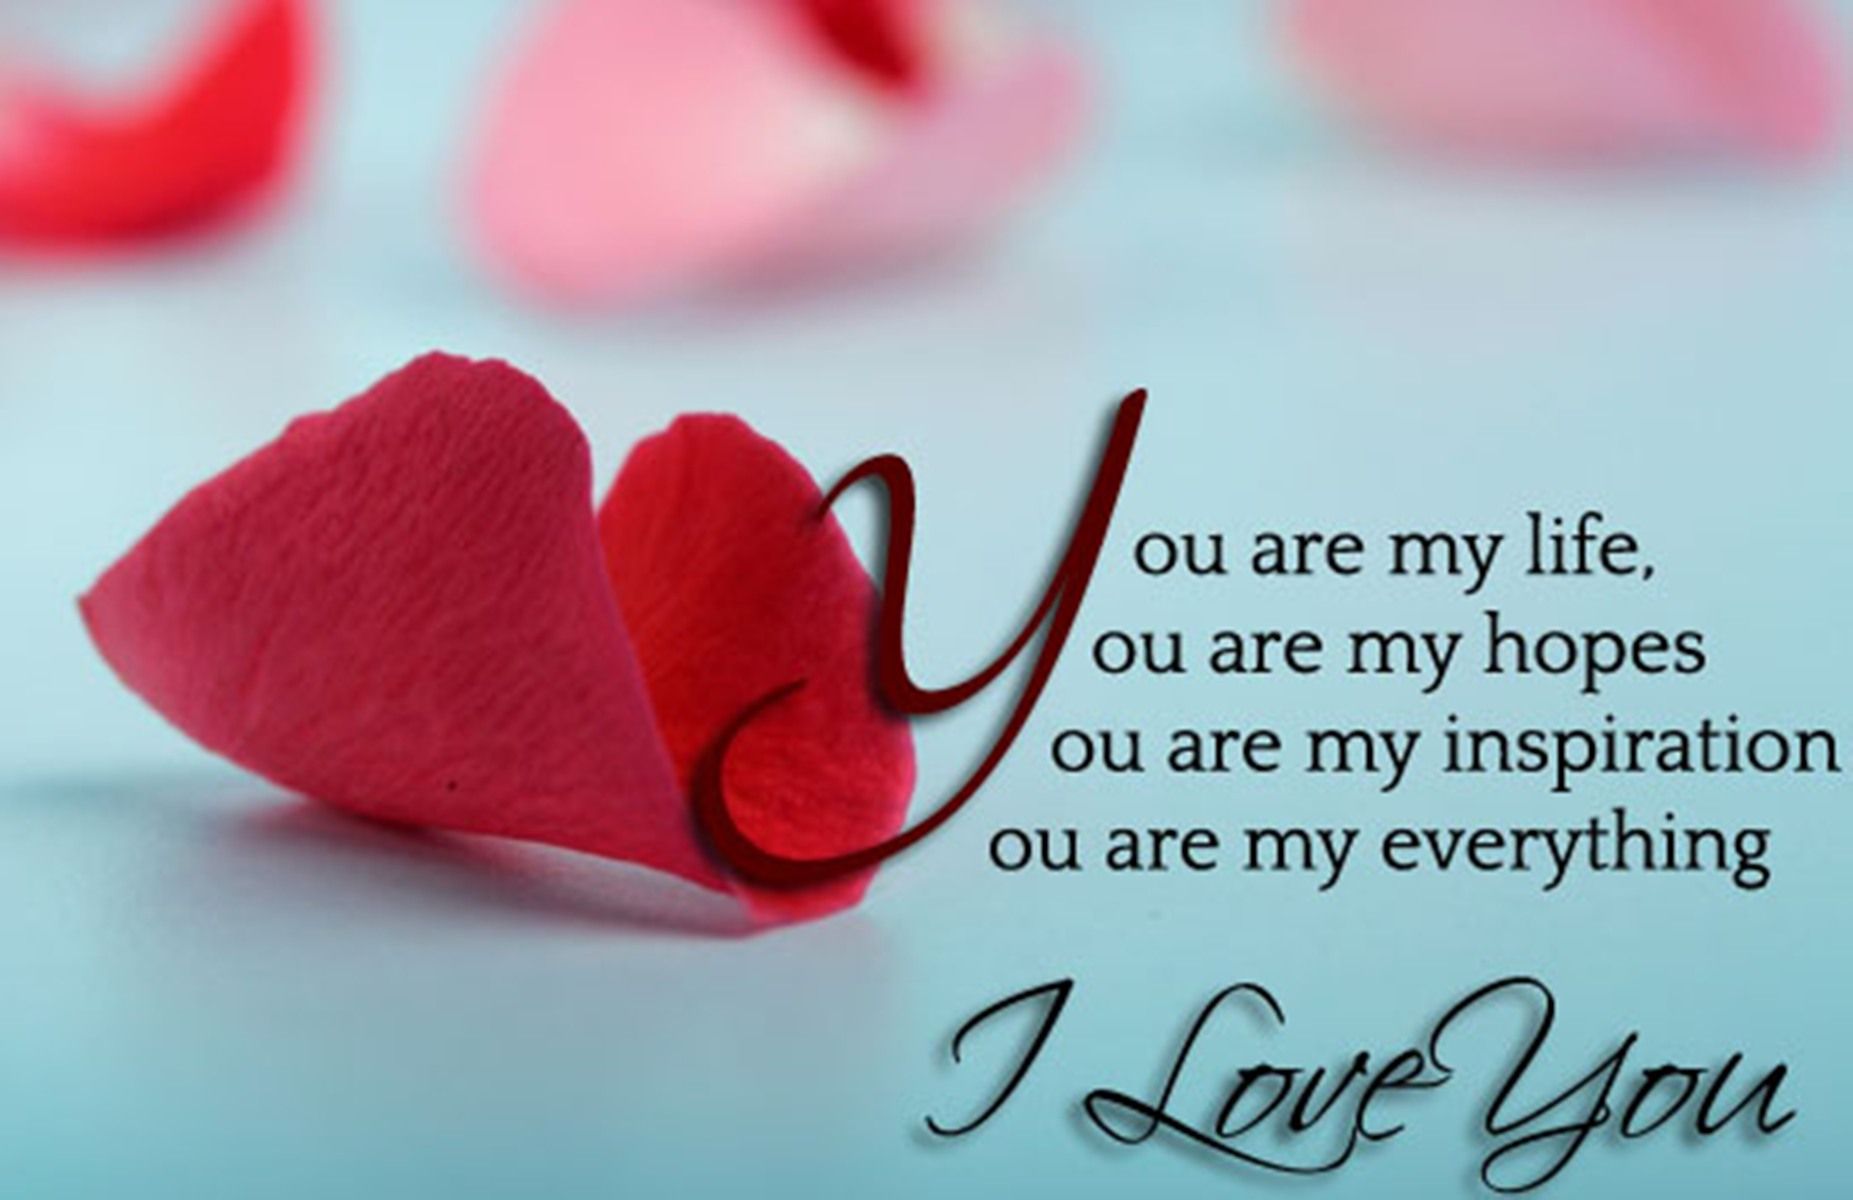 Love Is Free Quotes Wallpapers